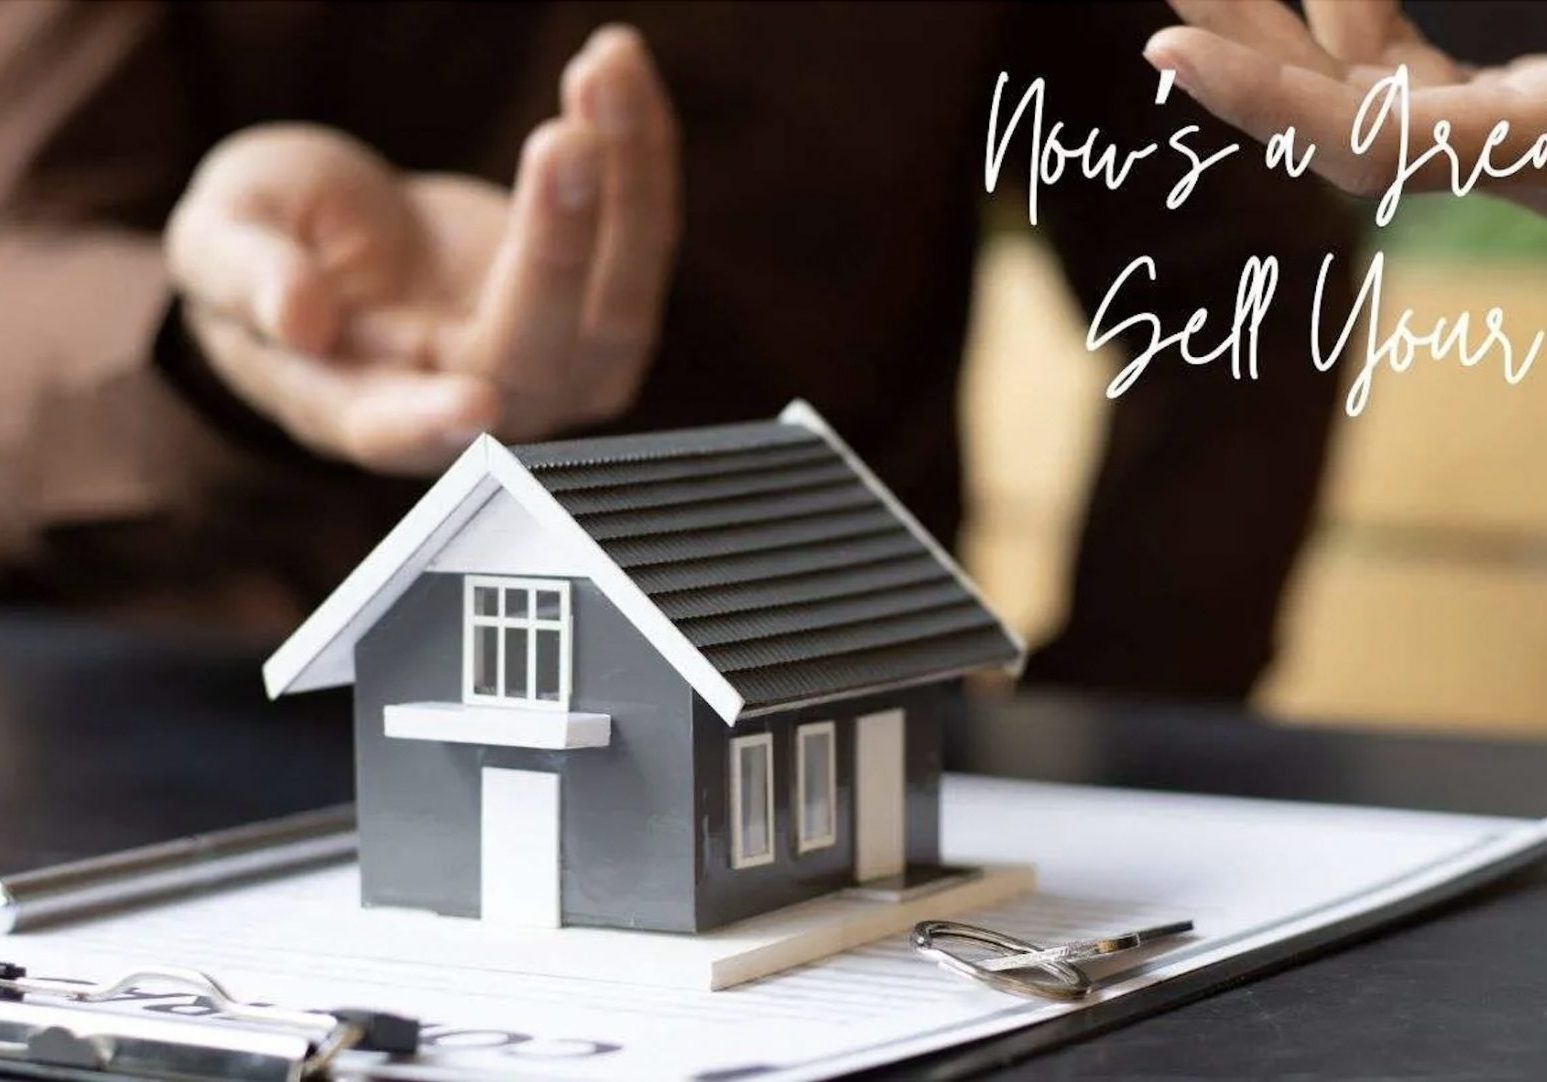 Now’s a Great Time To Sell Your House